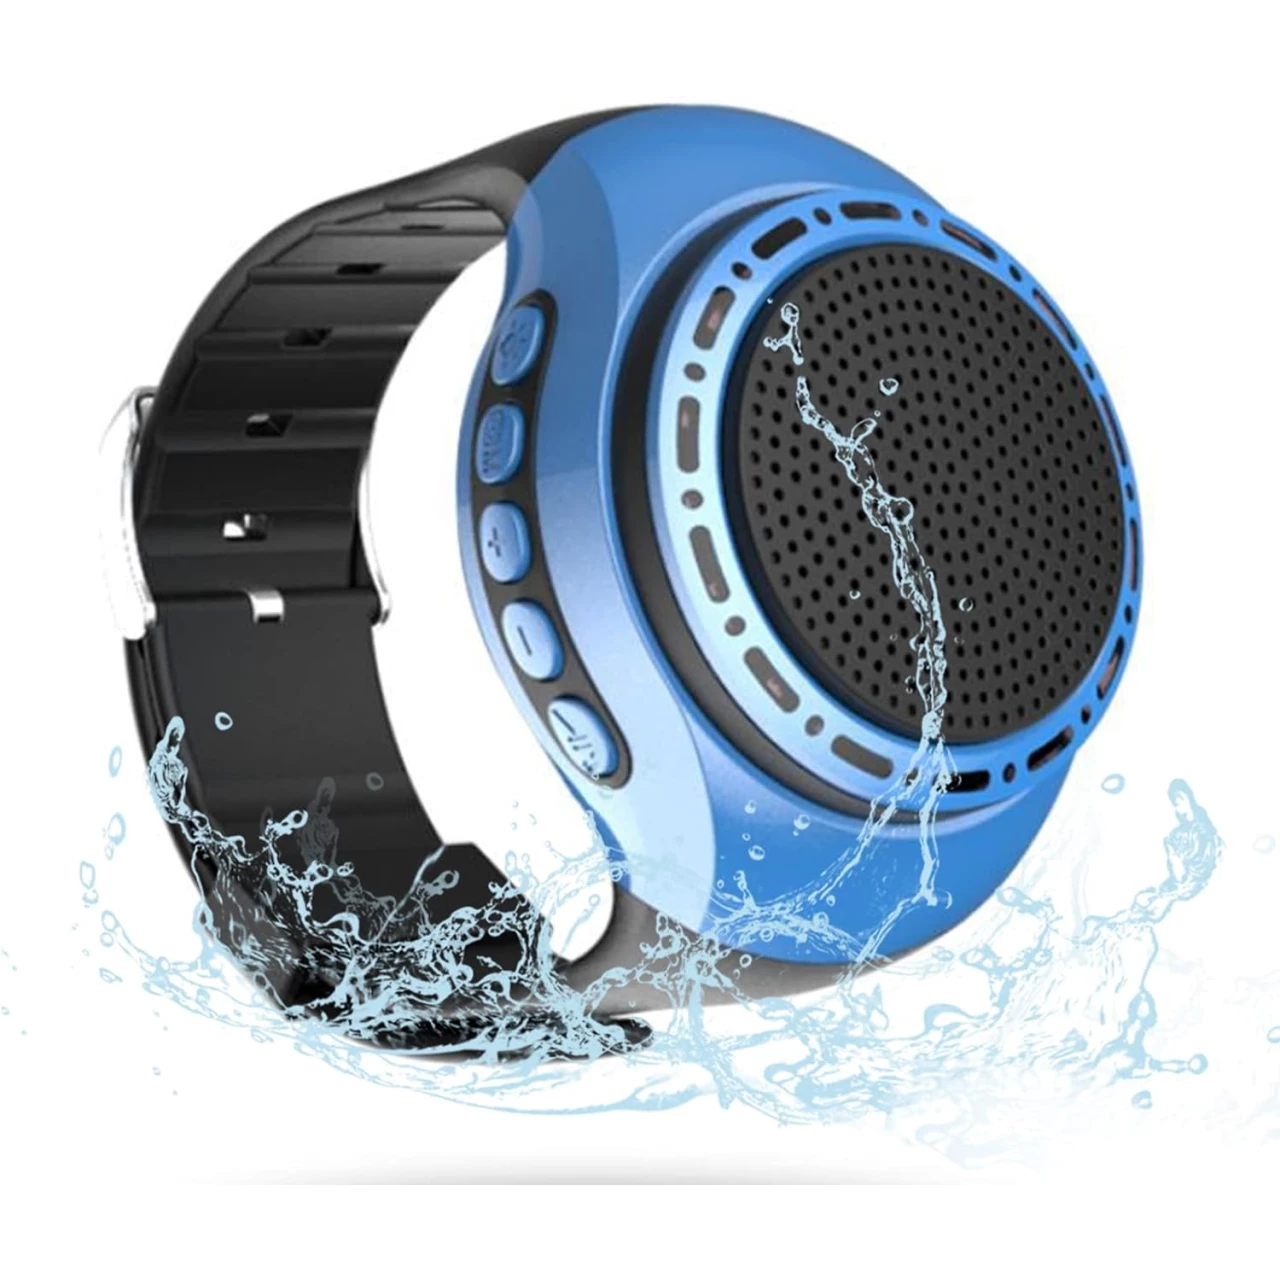 OriDecor Wireless Wearable Waterproof Wrist Portable Bluetooth Speaker Watch with Multi Function FM Radio &amp; MP3 Player &amp; TWS &amp; Selfie &amp; Ultra Long Standby Time (Blue)